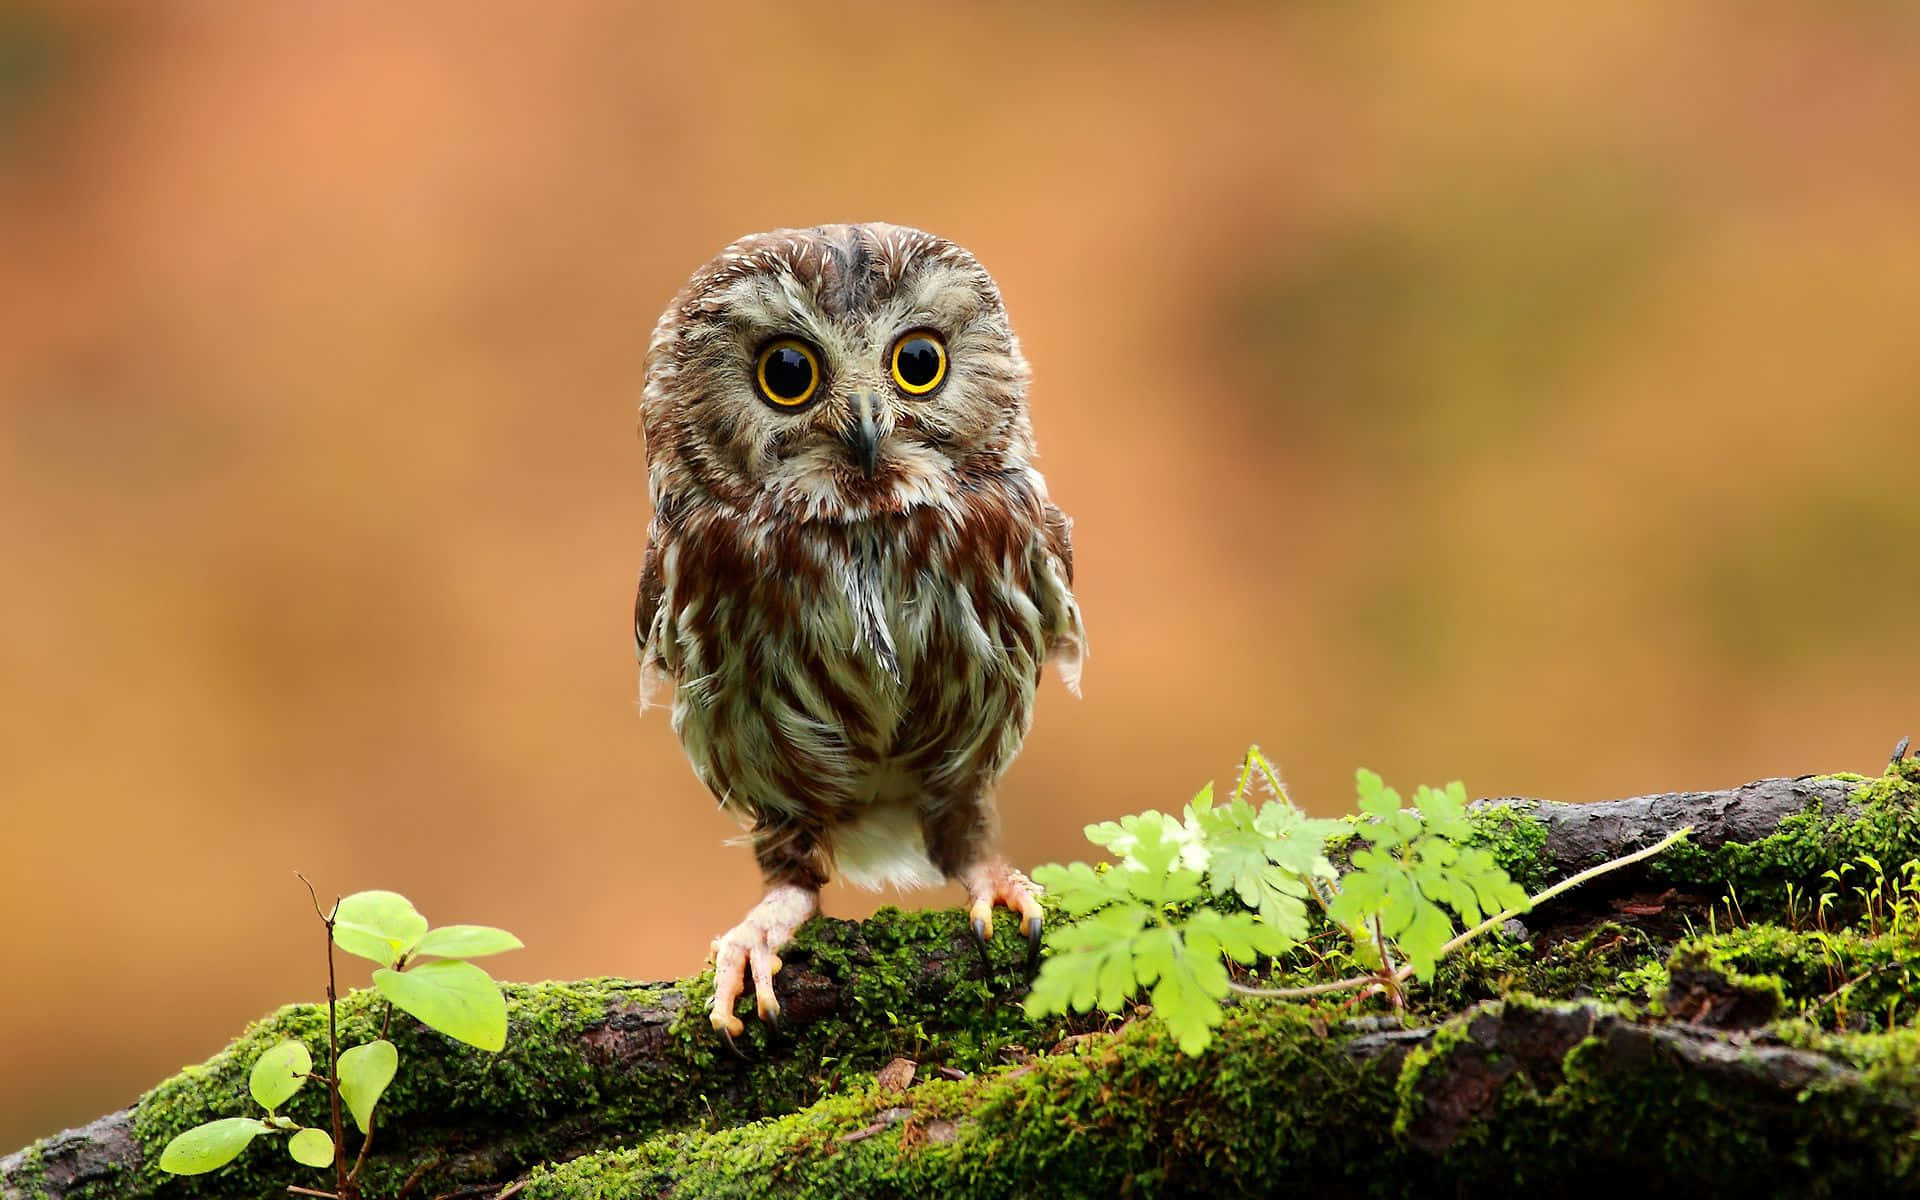 "adorable Young Owl Perched On A Branch, Looking Into The Distance"